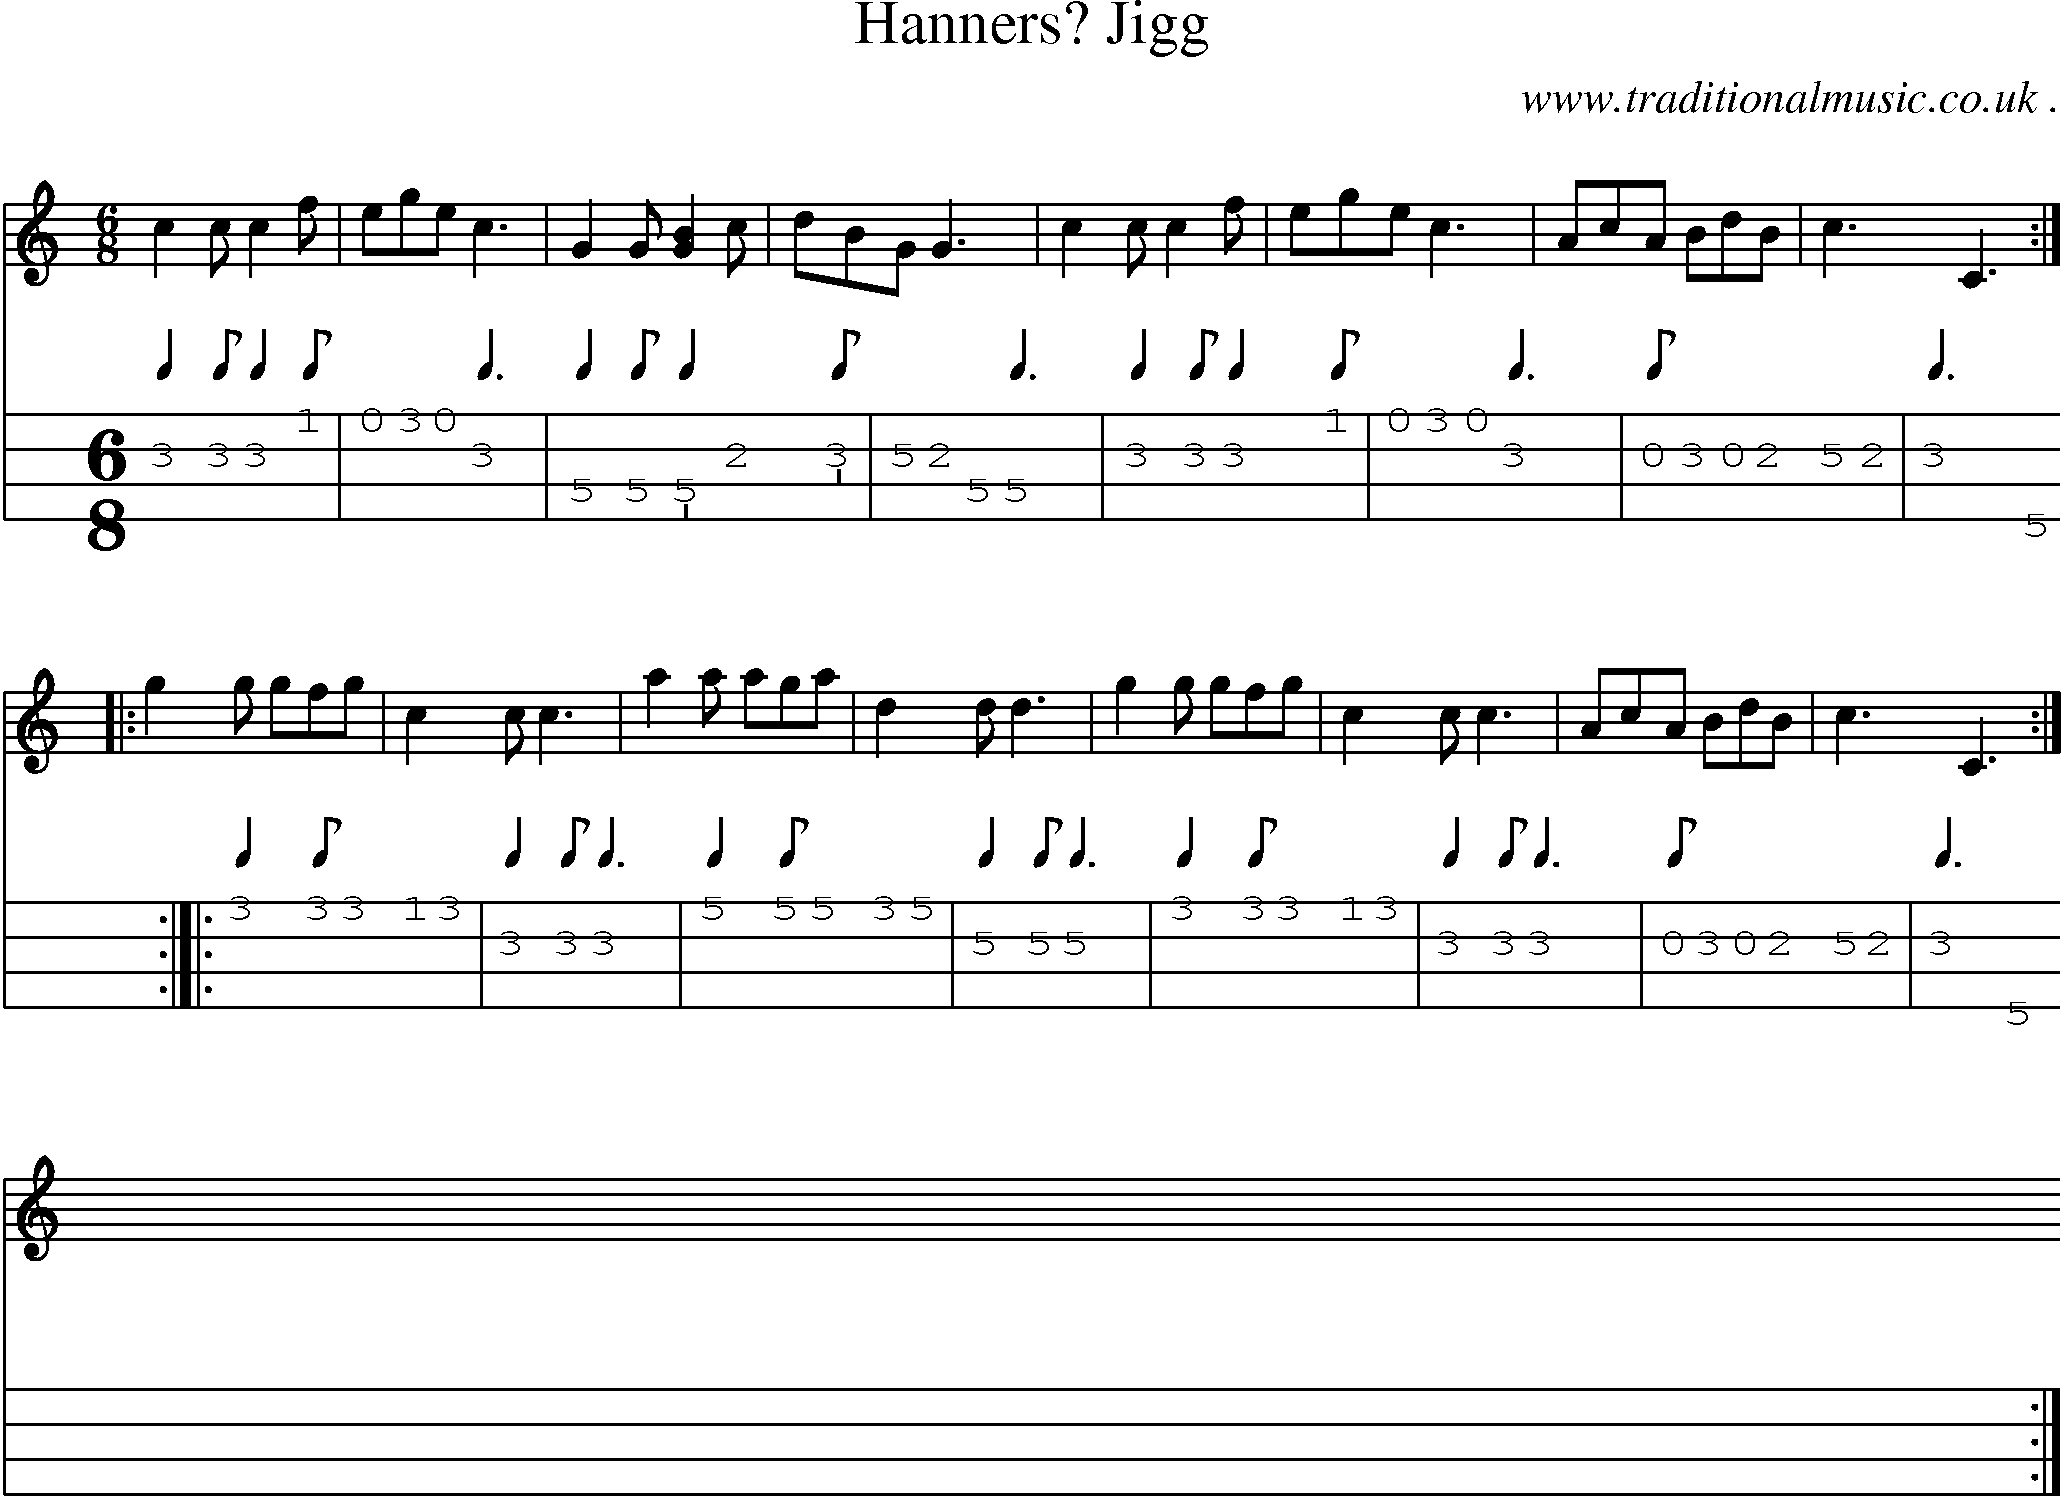 Sheet-Music and Mandolin Tabs for Hanners Jigg